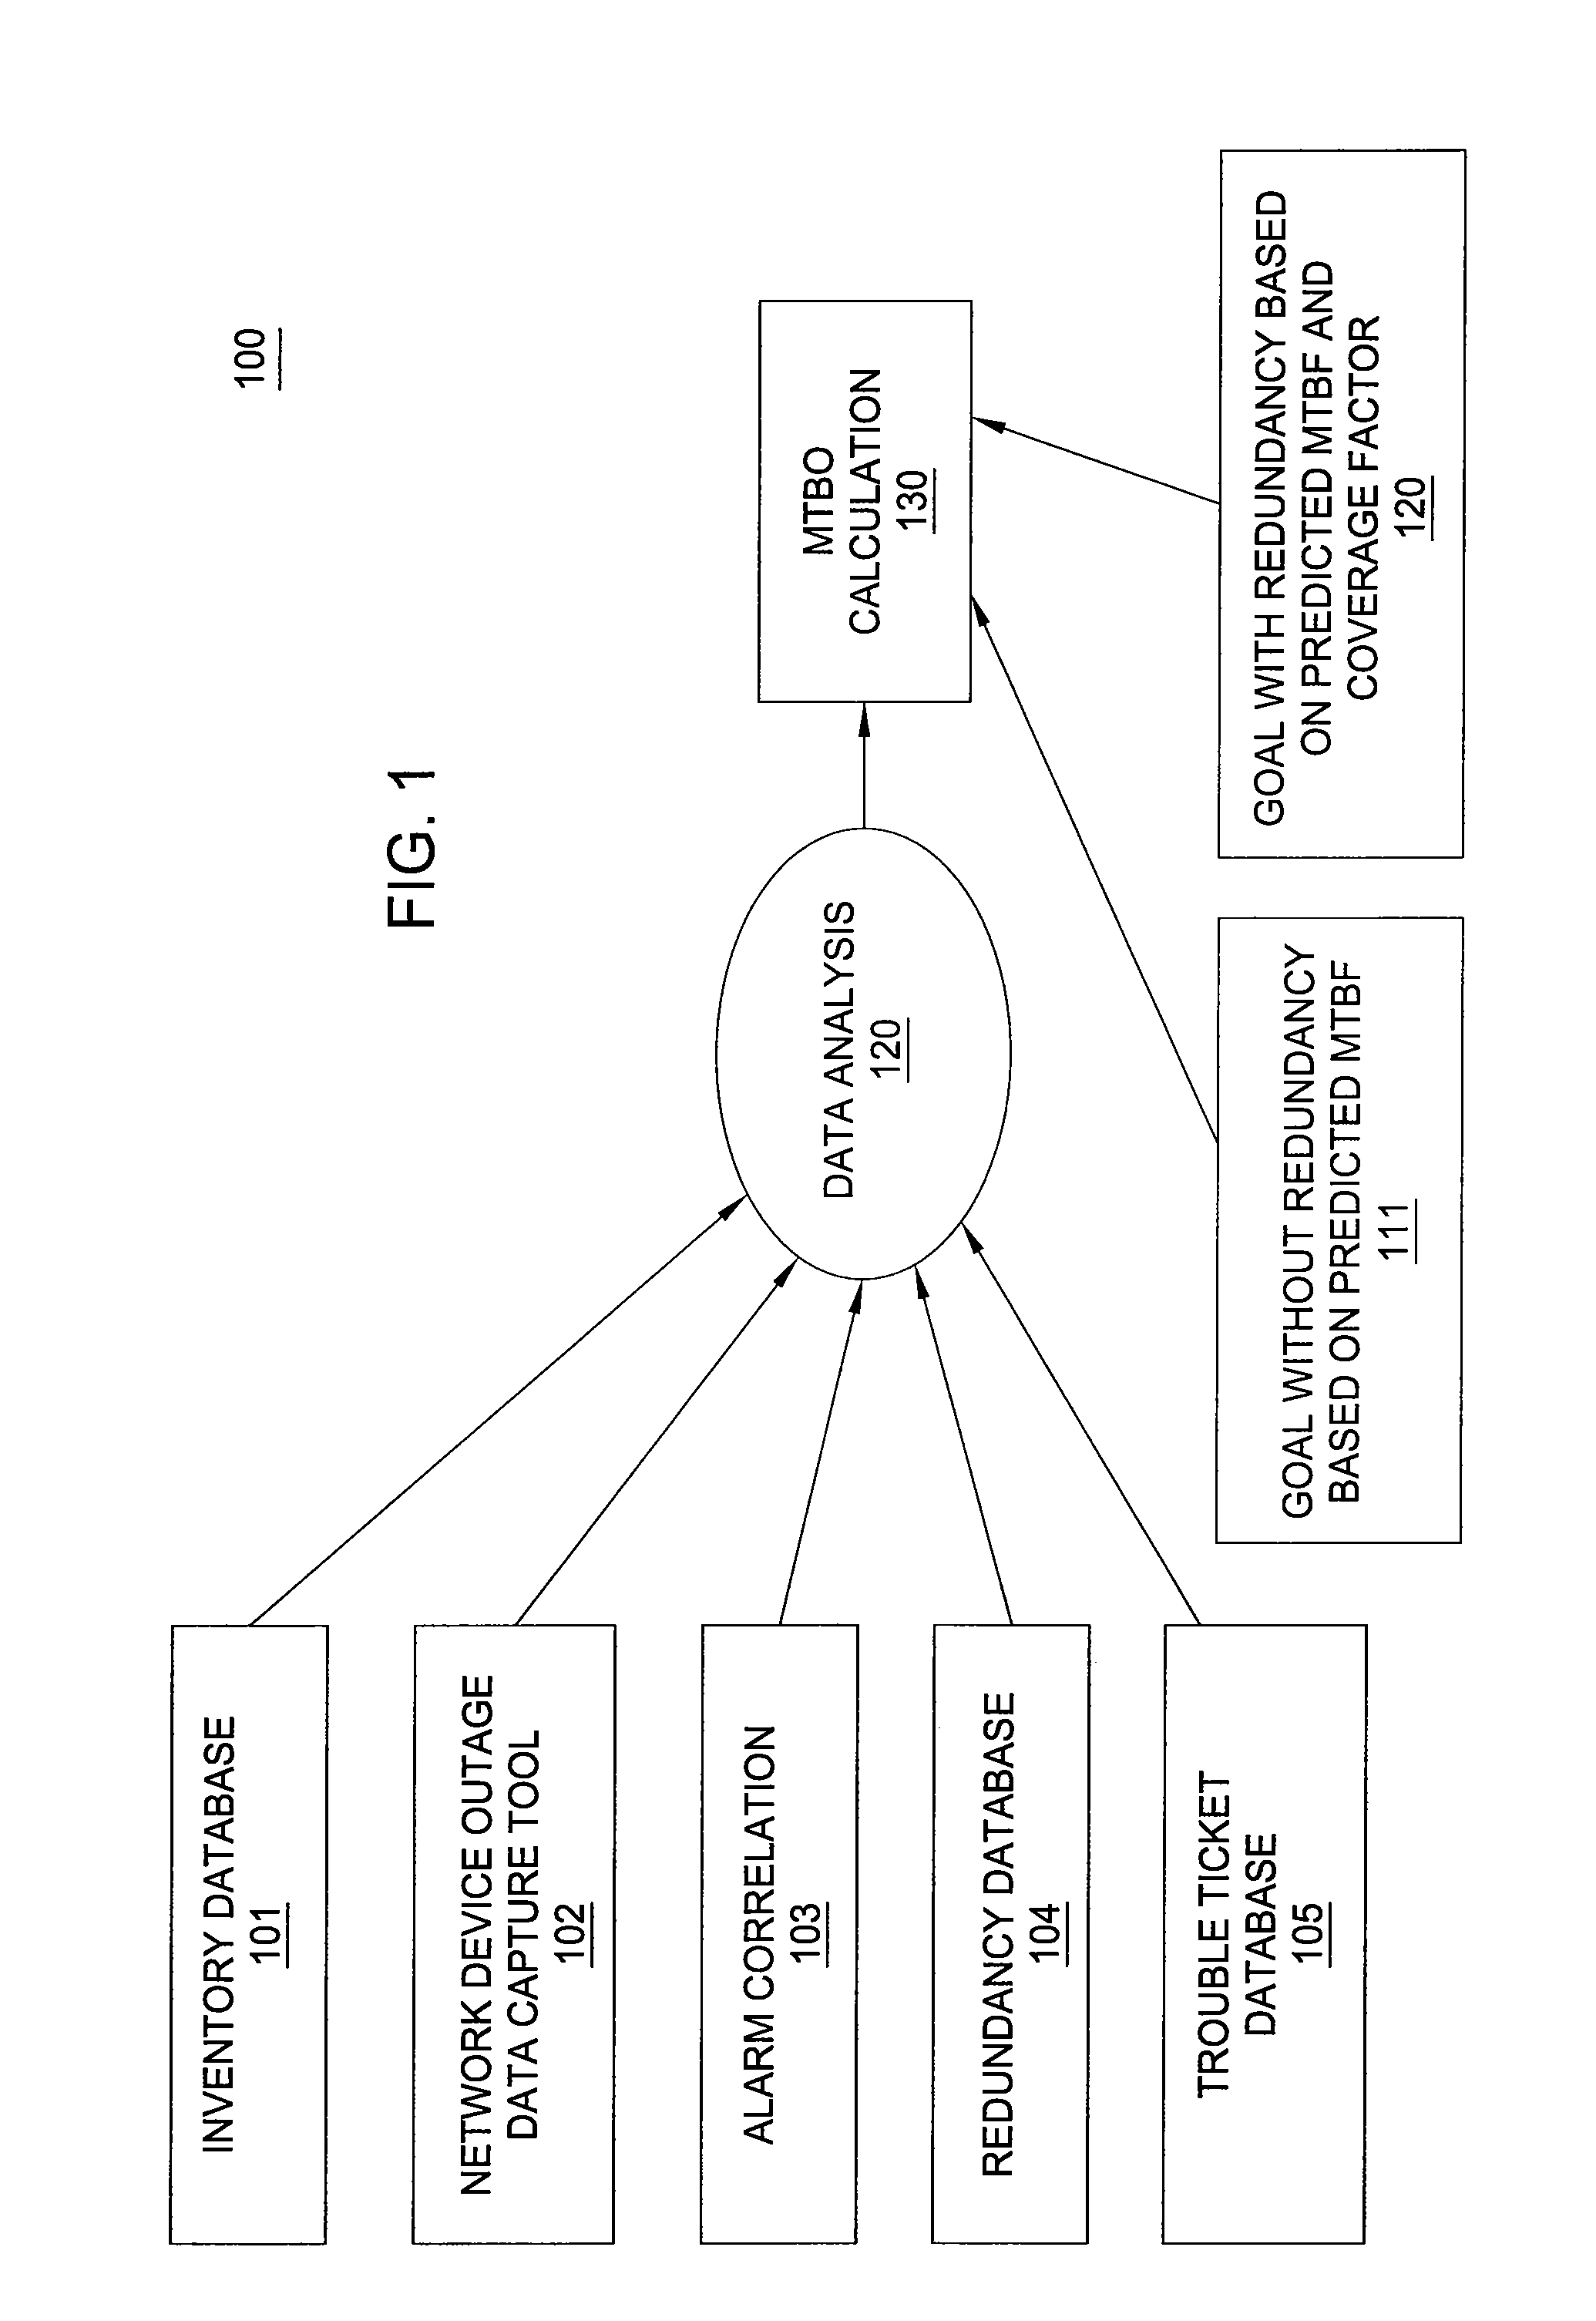 Method and apparatus for measuring customer impacting failure rate in communication networks